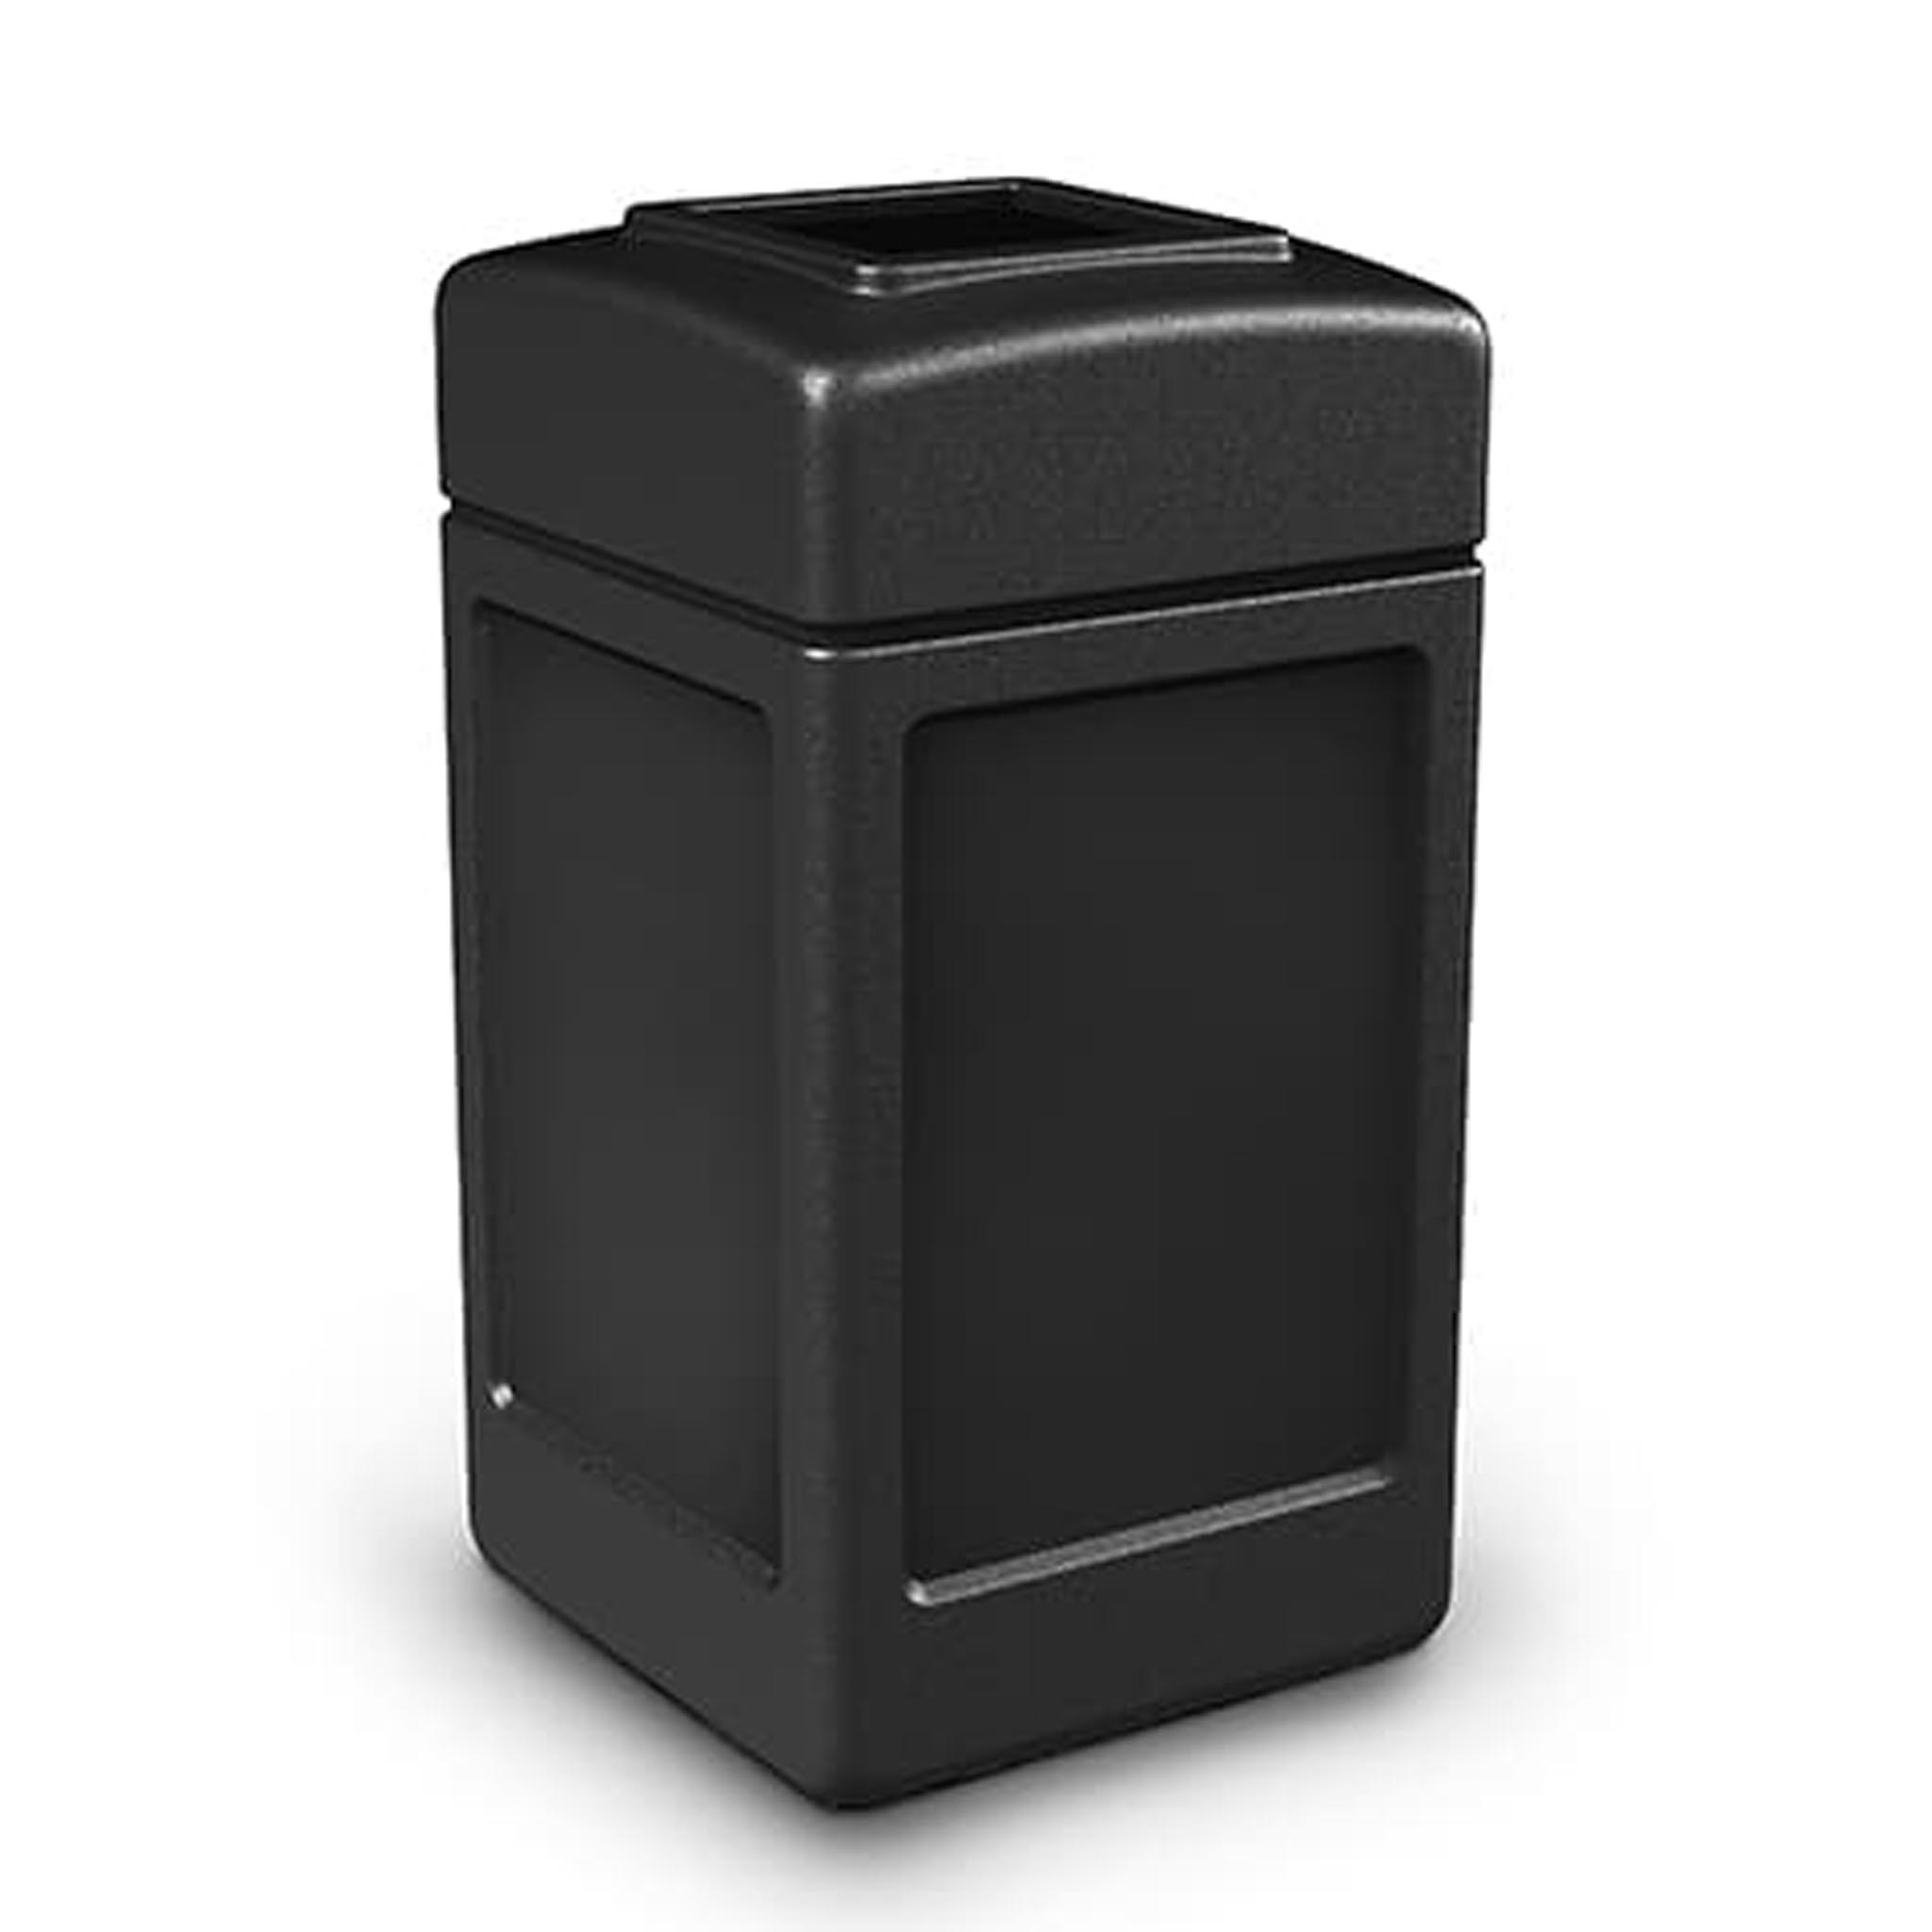 http://www.commercialzone.com/wp-content/uploads/2019/04/Open-Top-Square-Waste-Black-1.jpg